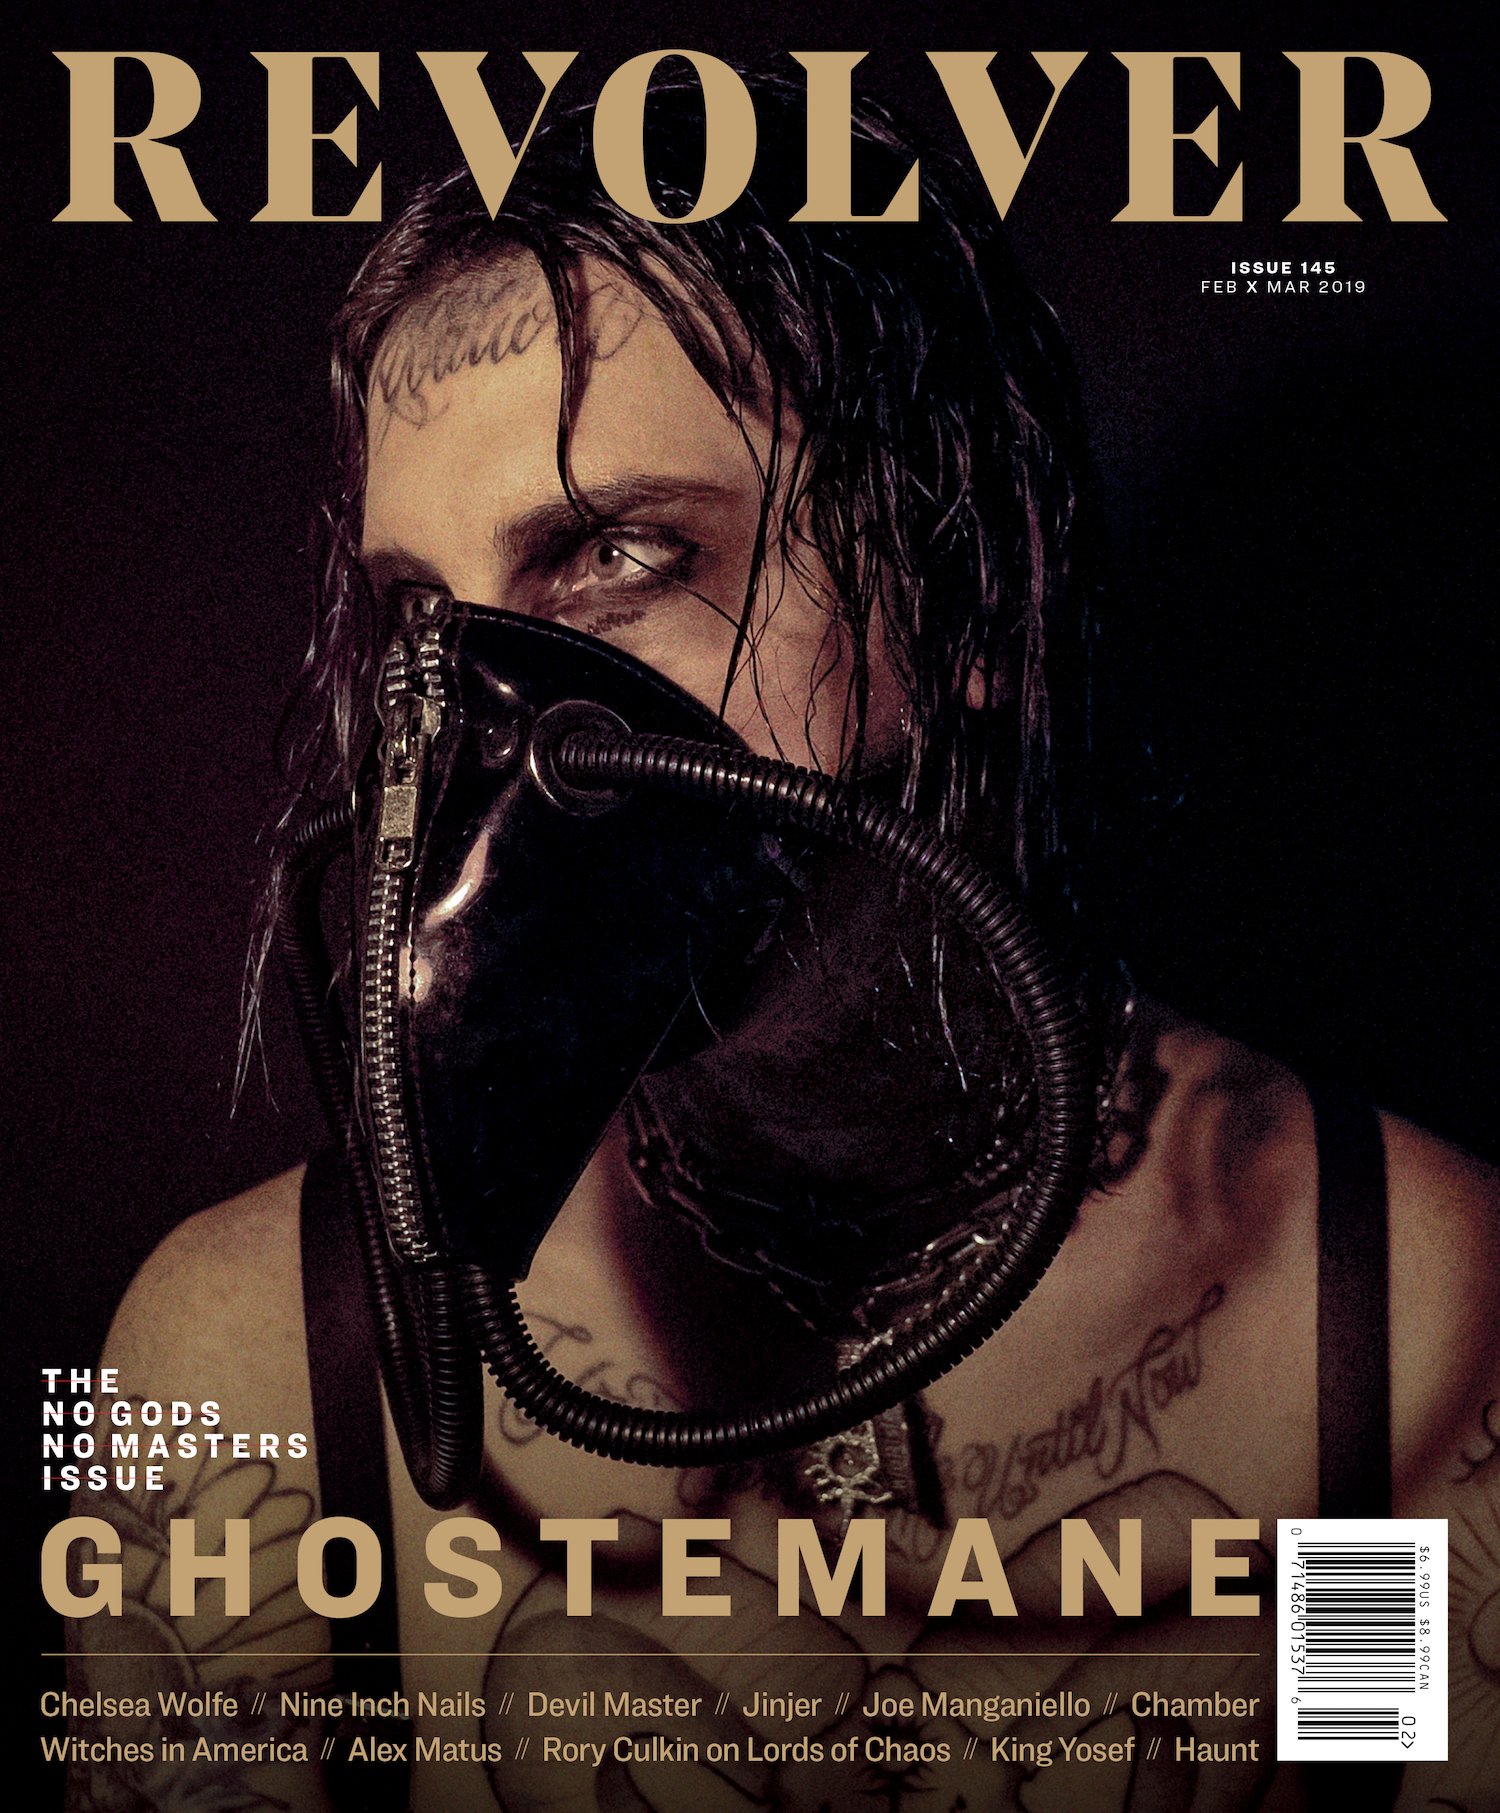 Ghostemane On The Cover Of 'Revolver' Magazine - SOUND IN THE SIGNALS